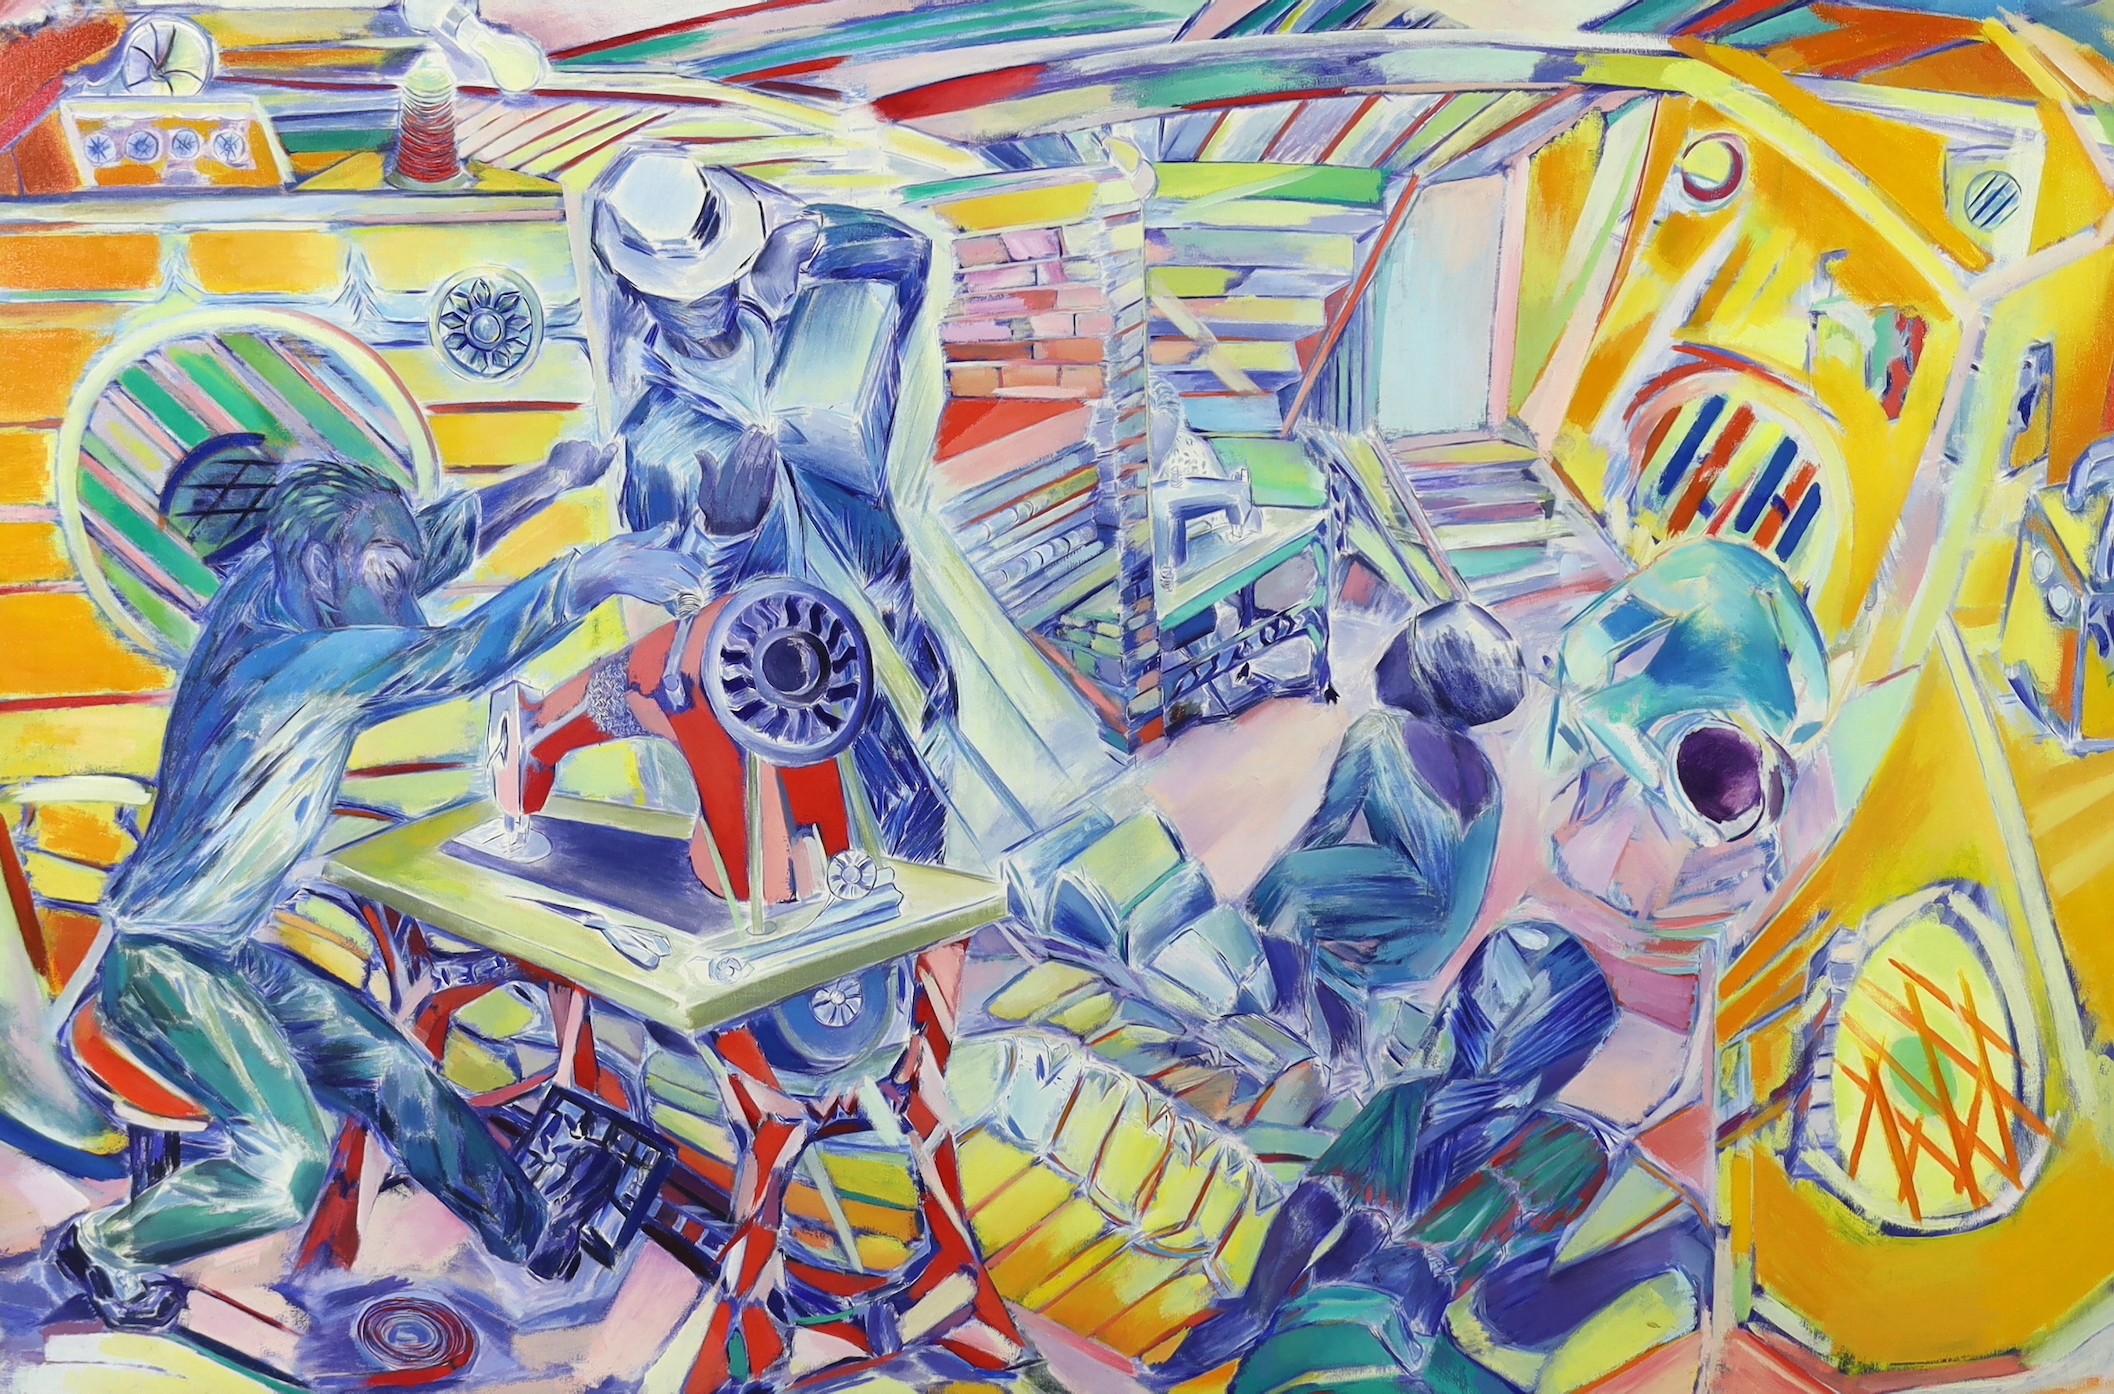 Denzil Forrester (1956-), 'Sewing Machine', oil on canvas, 121 x 183cm